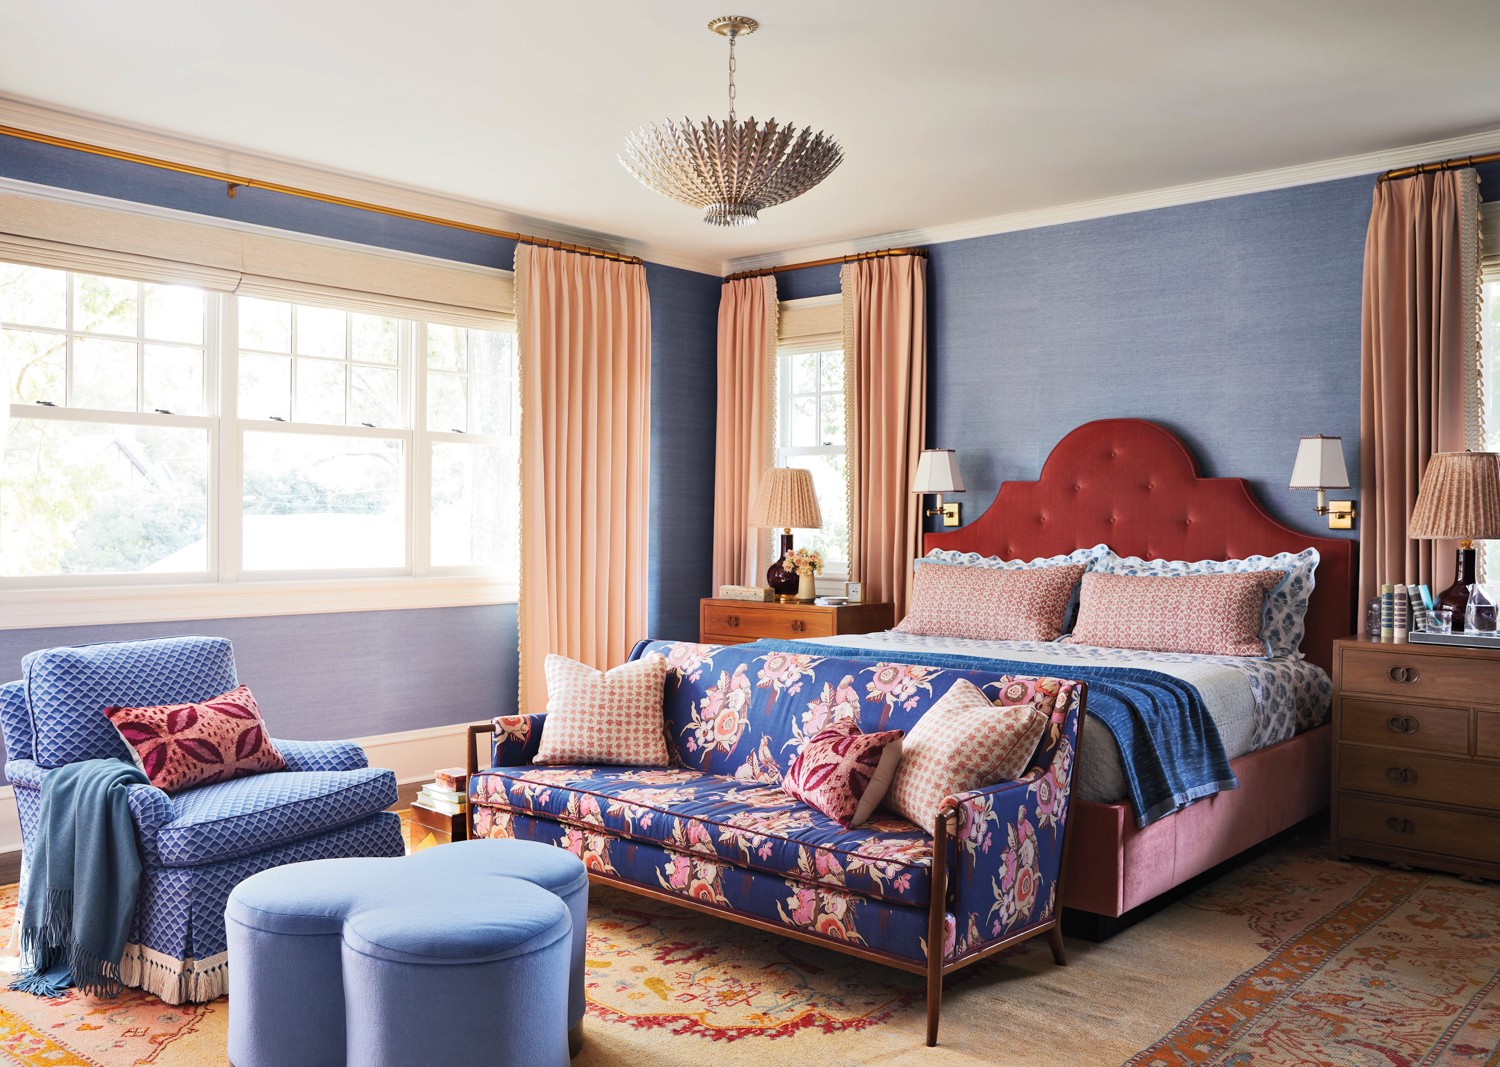 Bedroom with a custom bed, peach drapes, patterned settee, blue furnishings and blue wallcovering